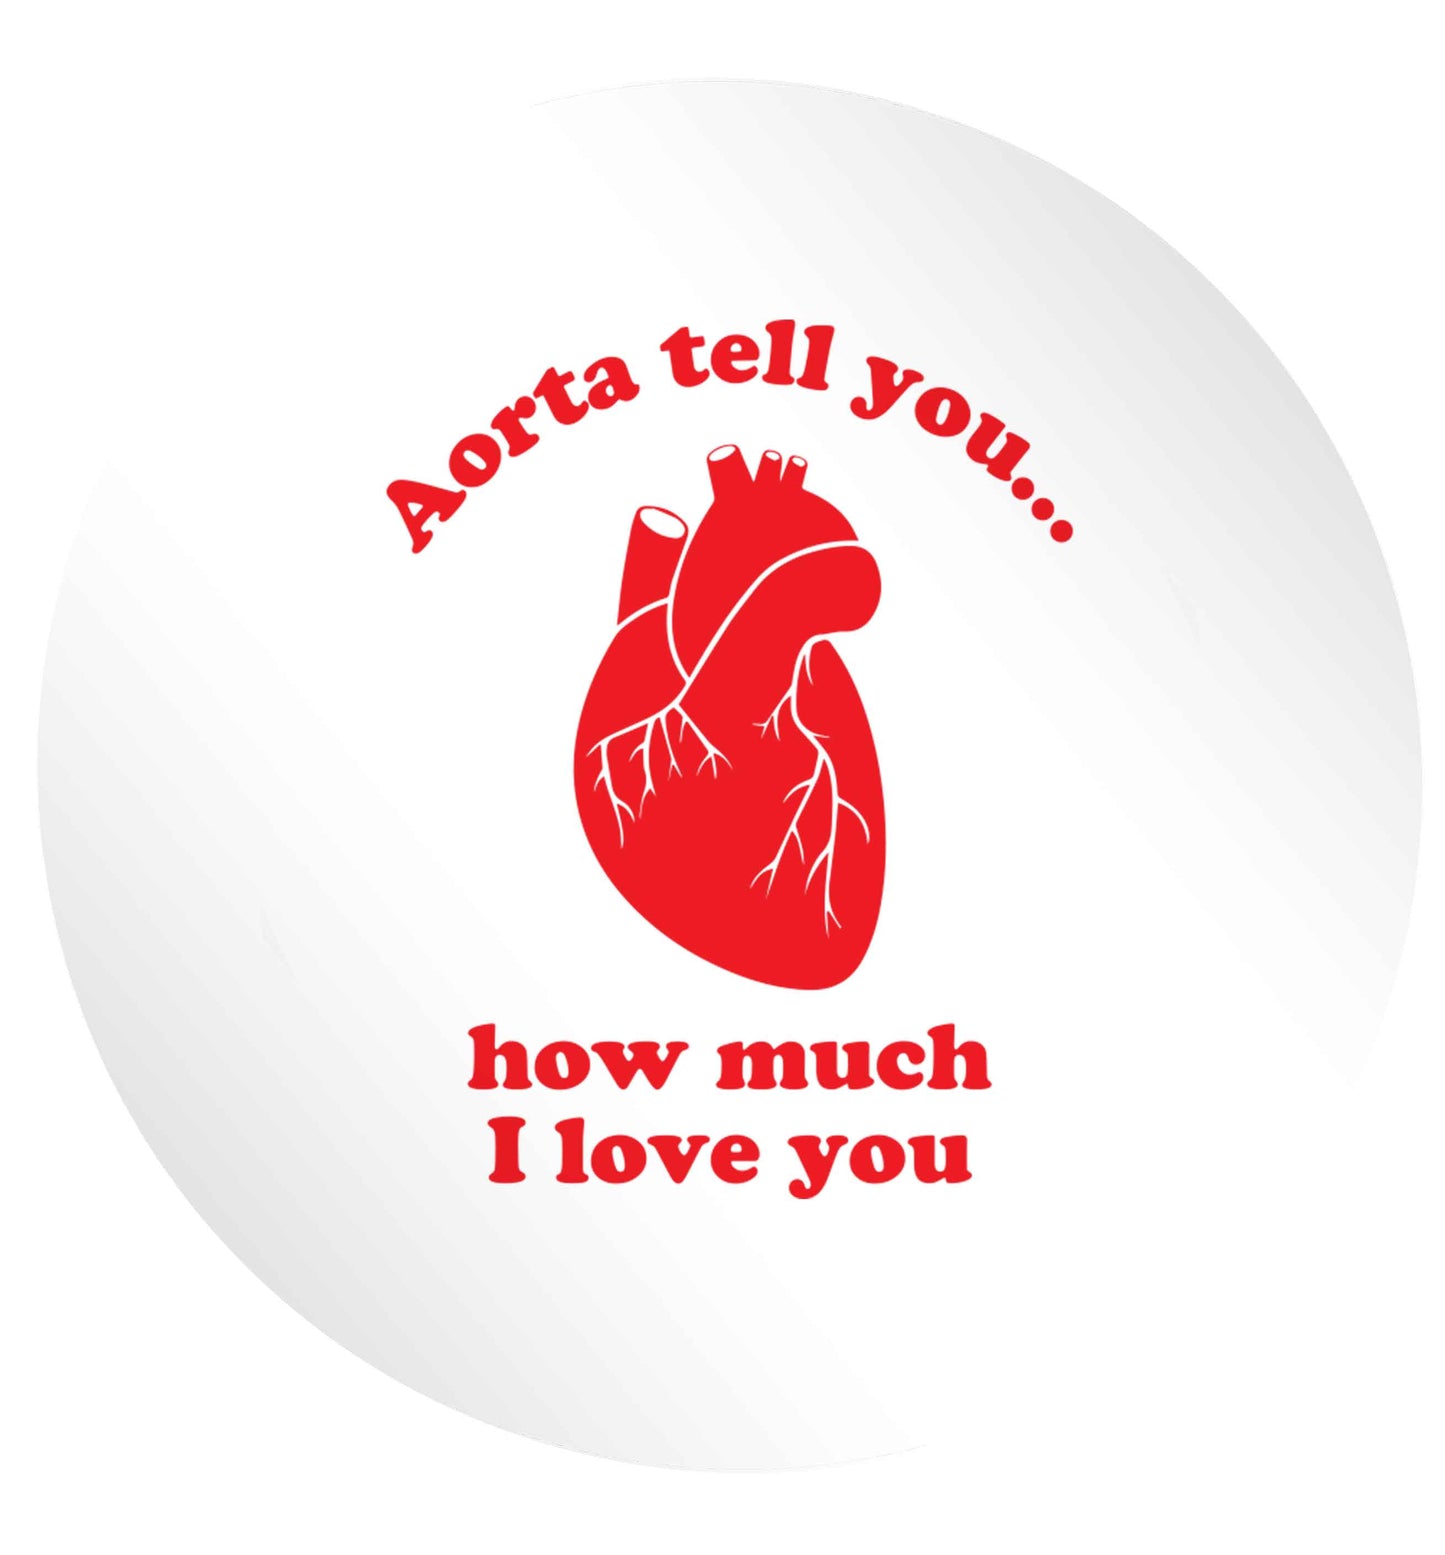 Aorta tell you how much I love you 24 @ 45mm matt circle stickers